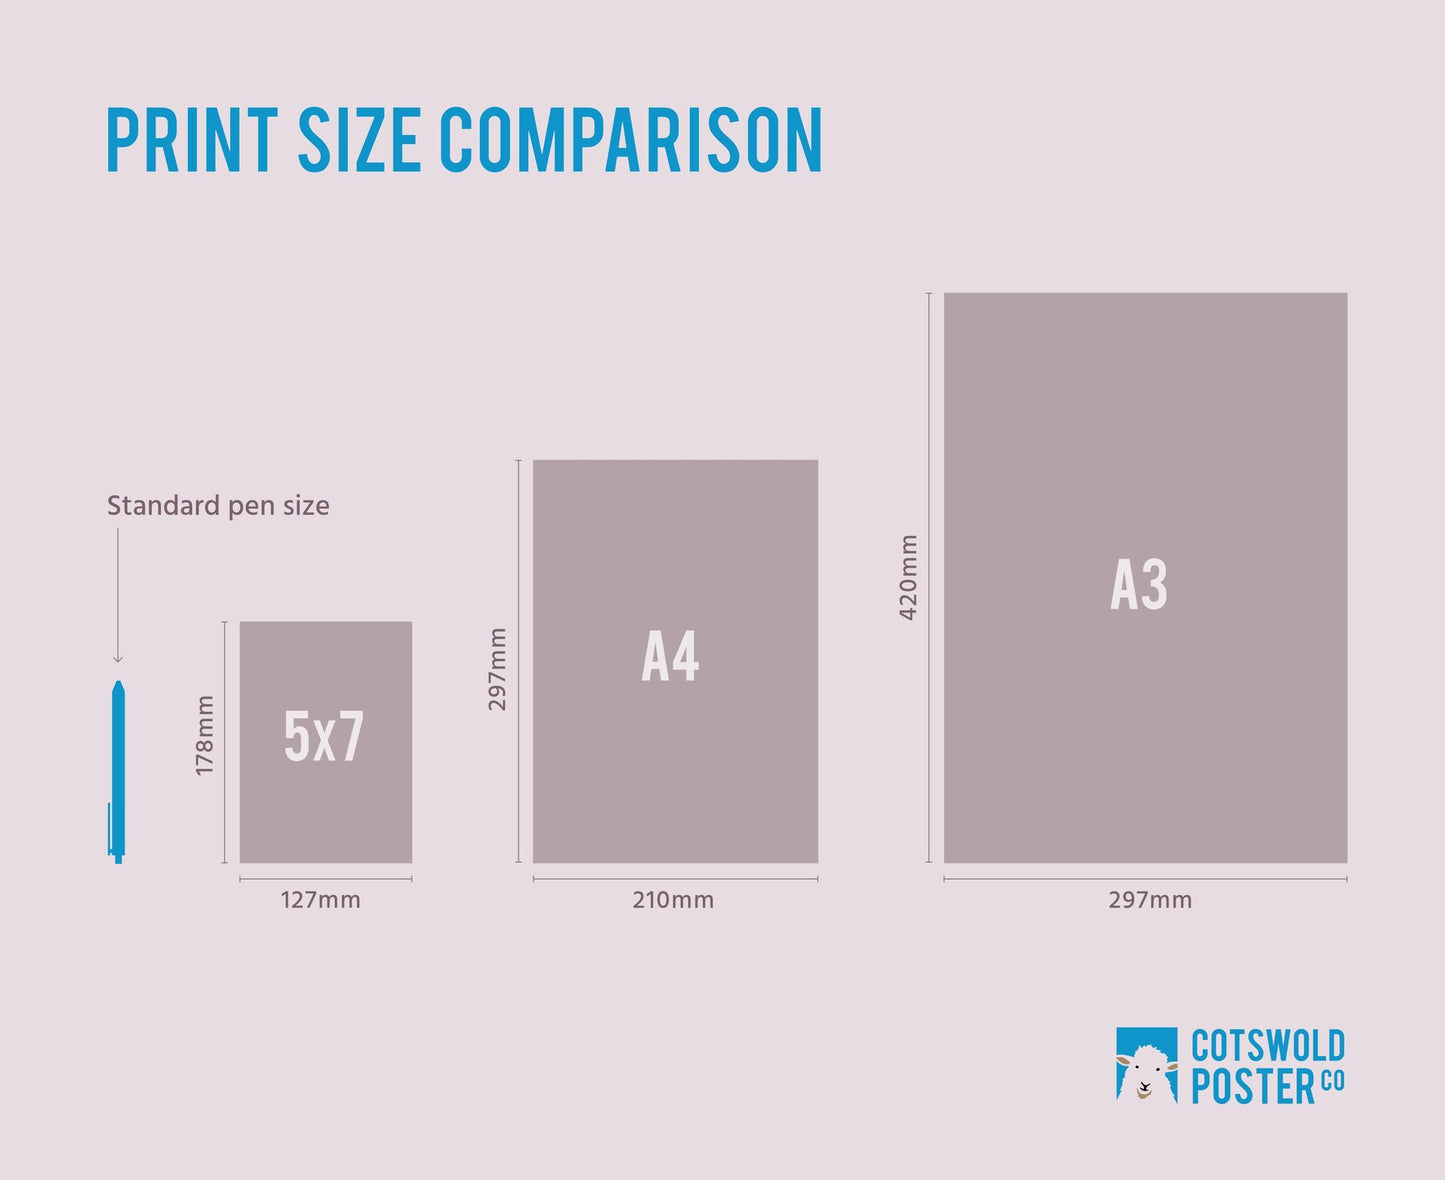 A comparison of the print sizes